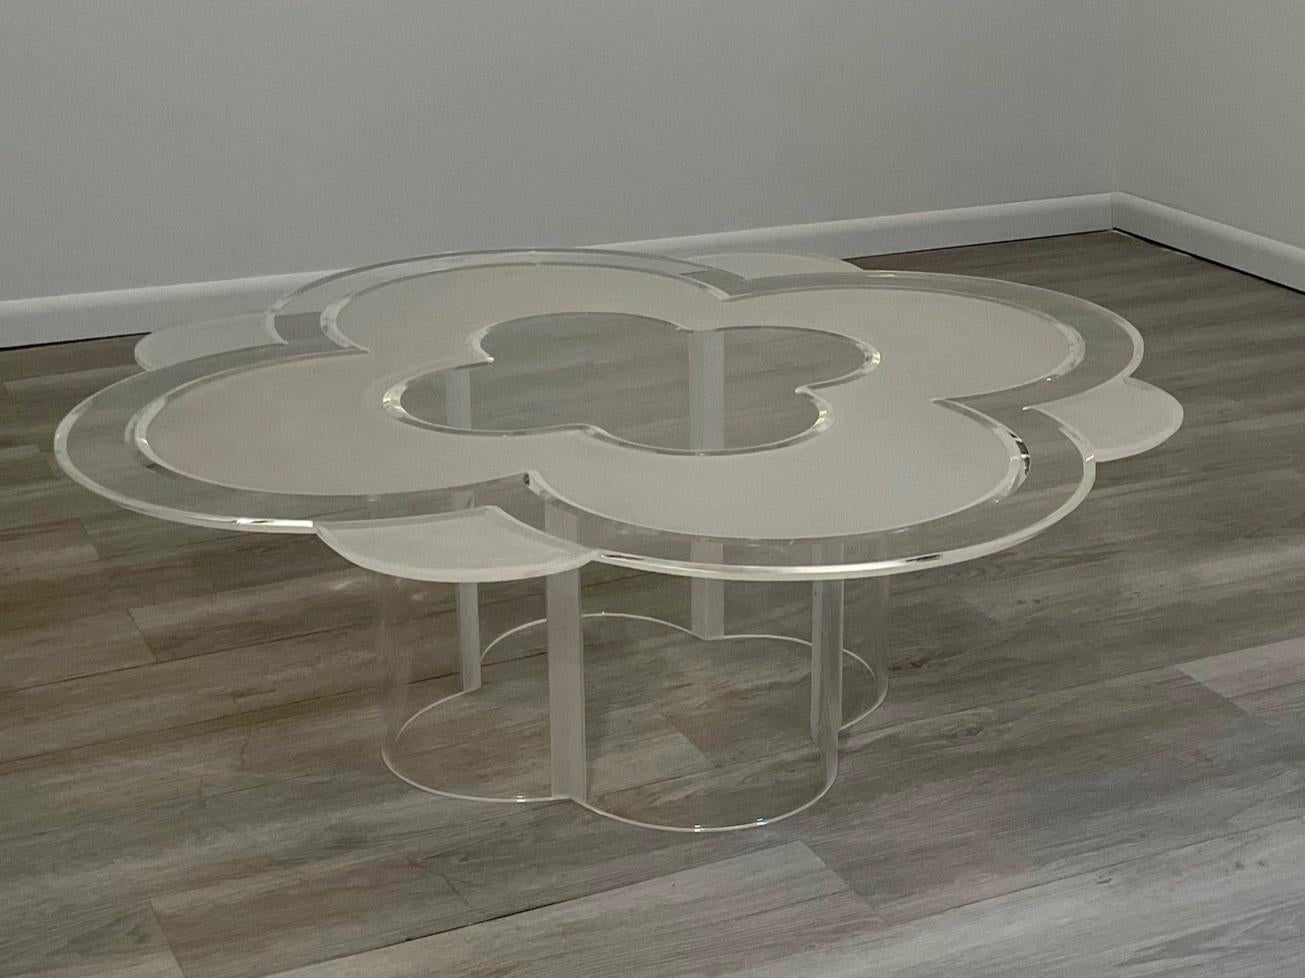 Moviestar Glamorous Lucite Mid-Century Modern Camelia Coffee Table For Sale 7